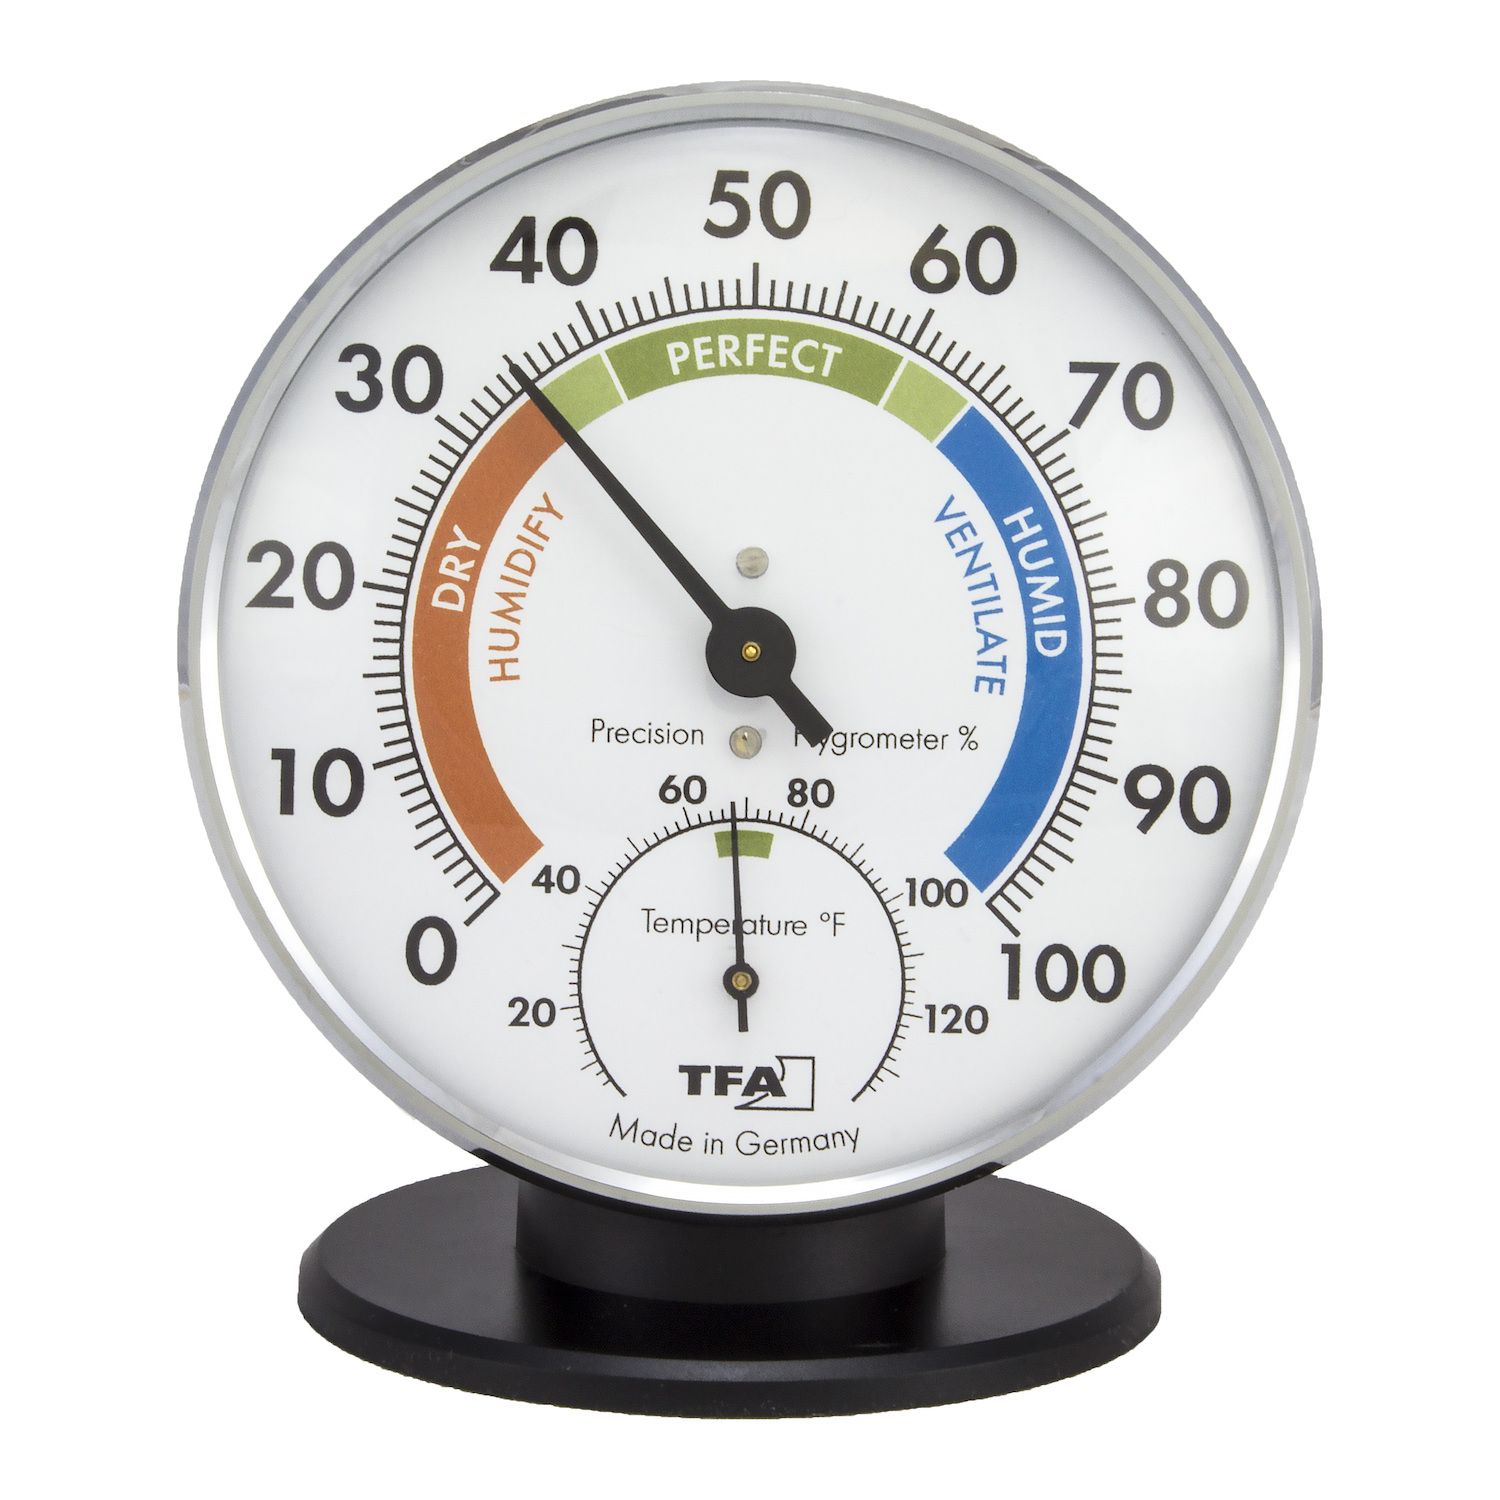 Wall Thermometer-8 Decorative Indoor/Outdoor Temperature and Hygrometer Humidity Gauge by Pure Garden (Silver)